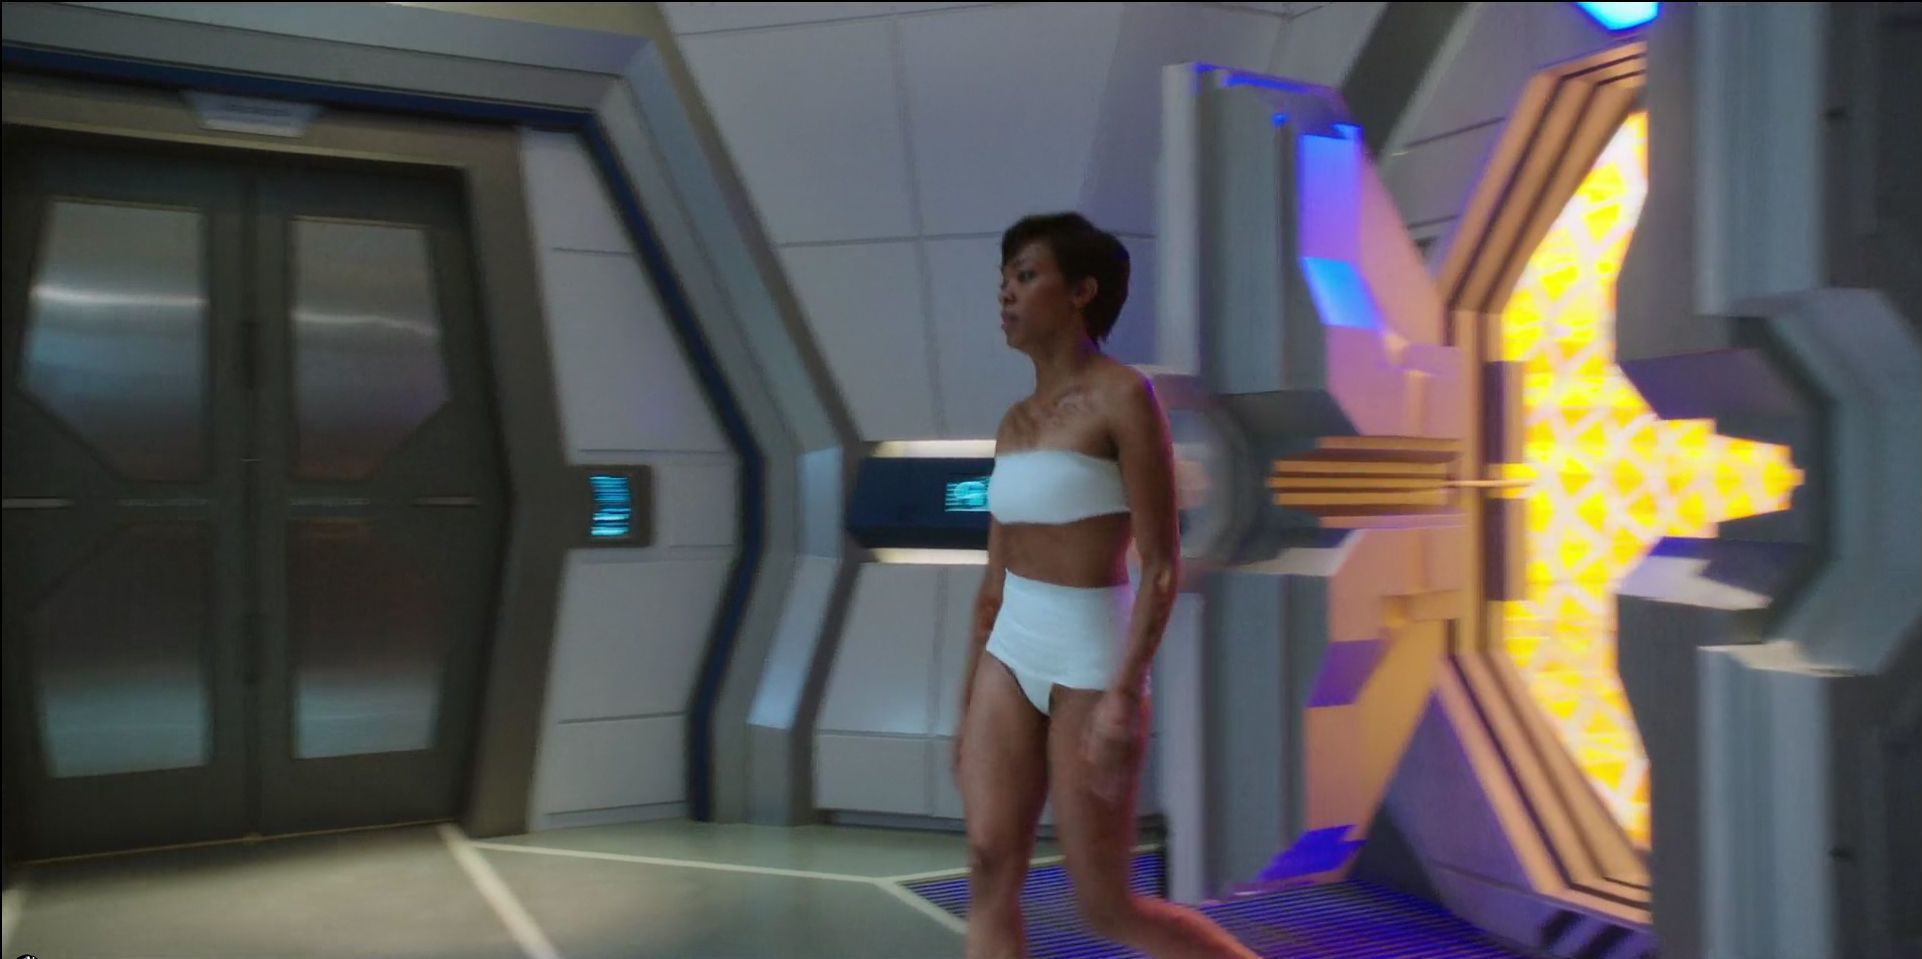 Nude star trek discovery Photos That